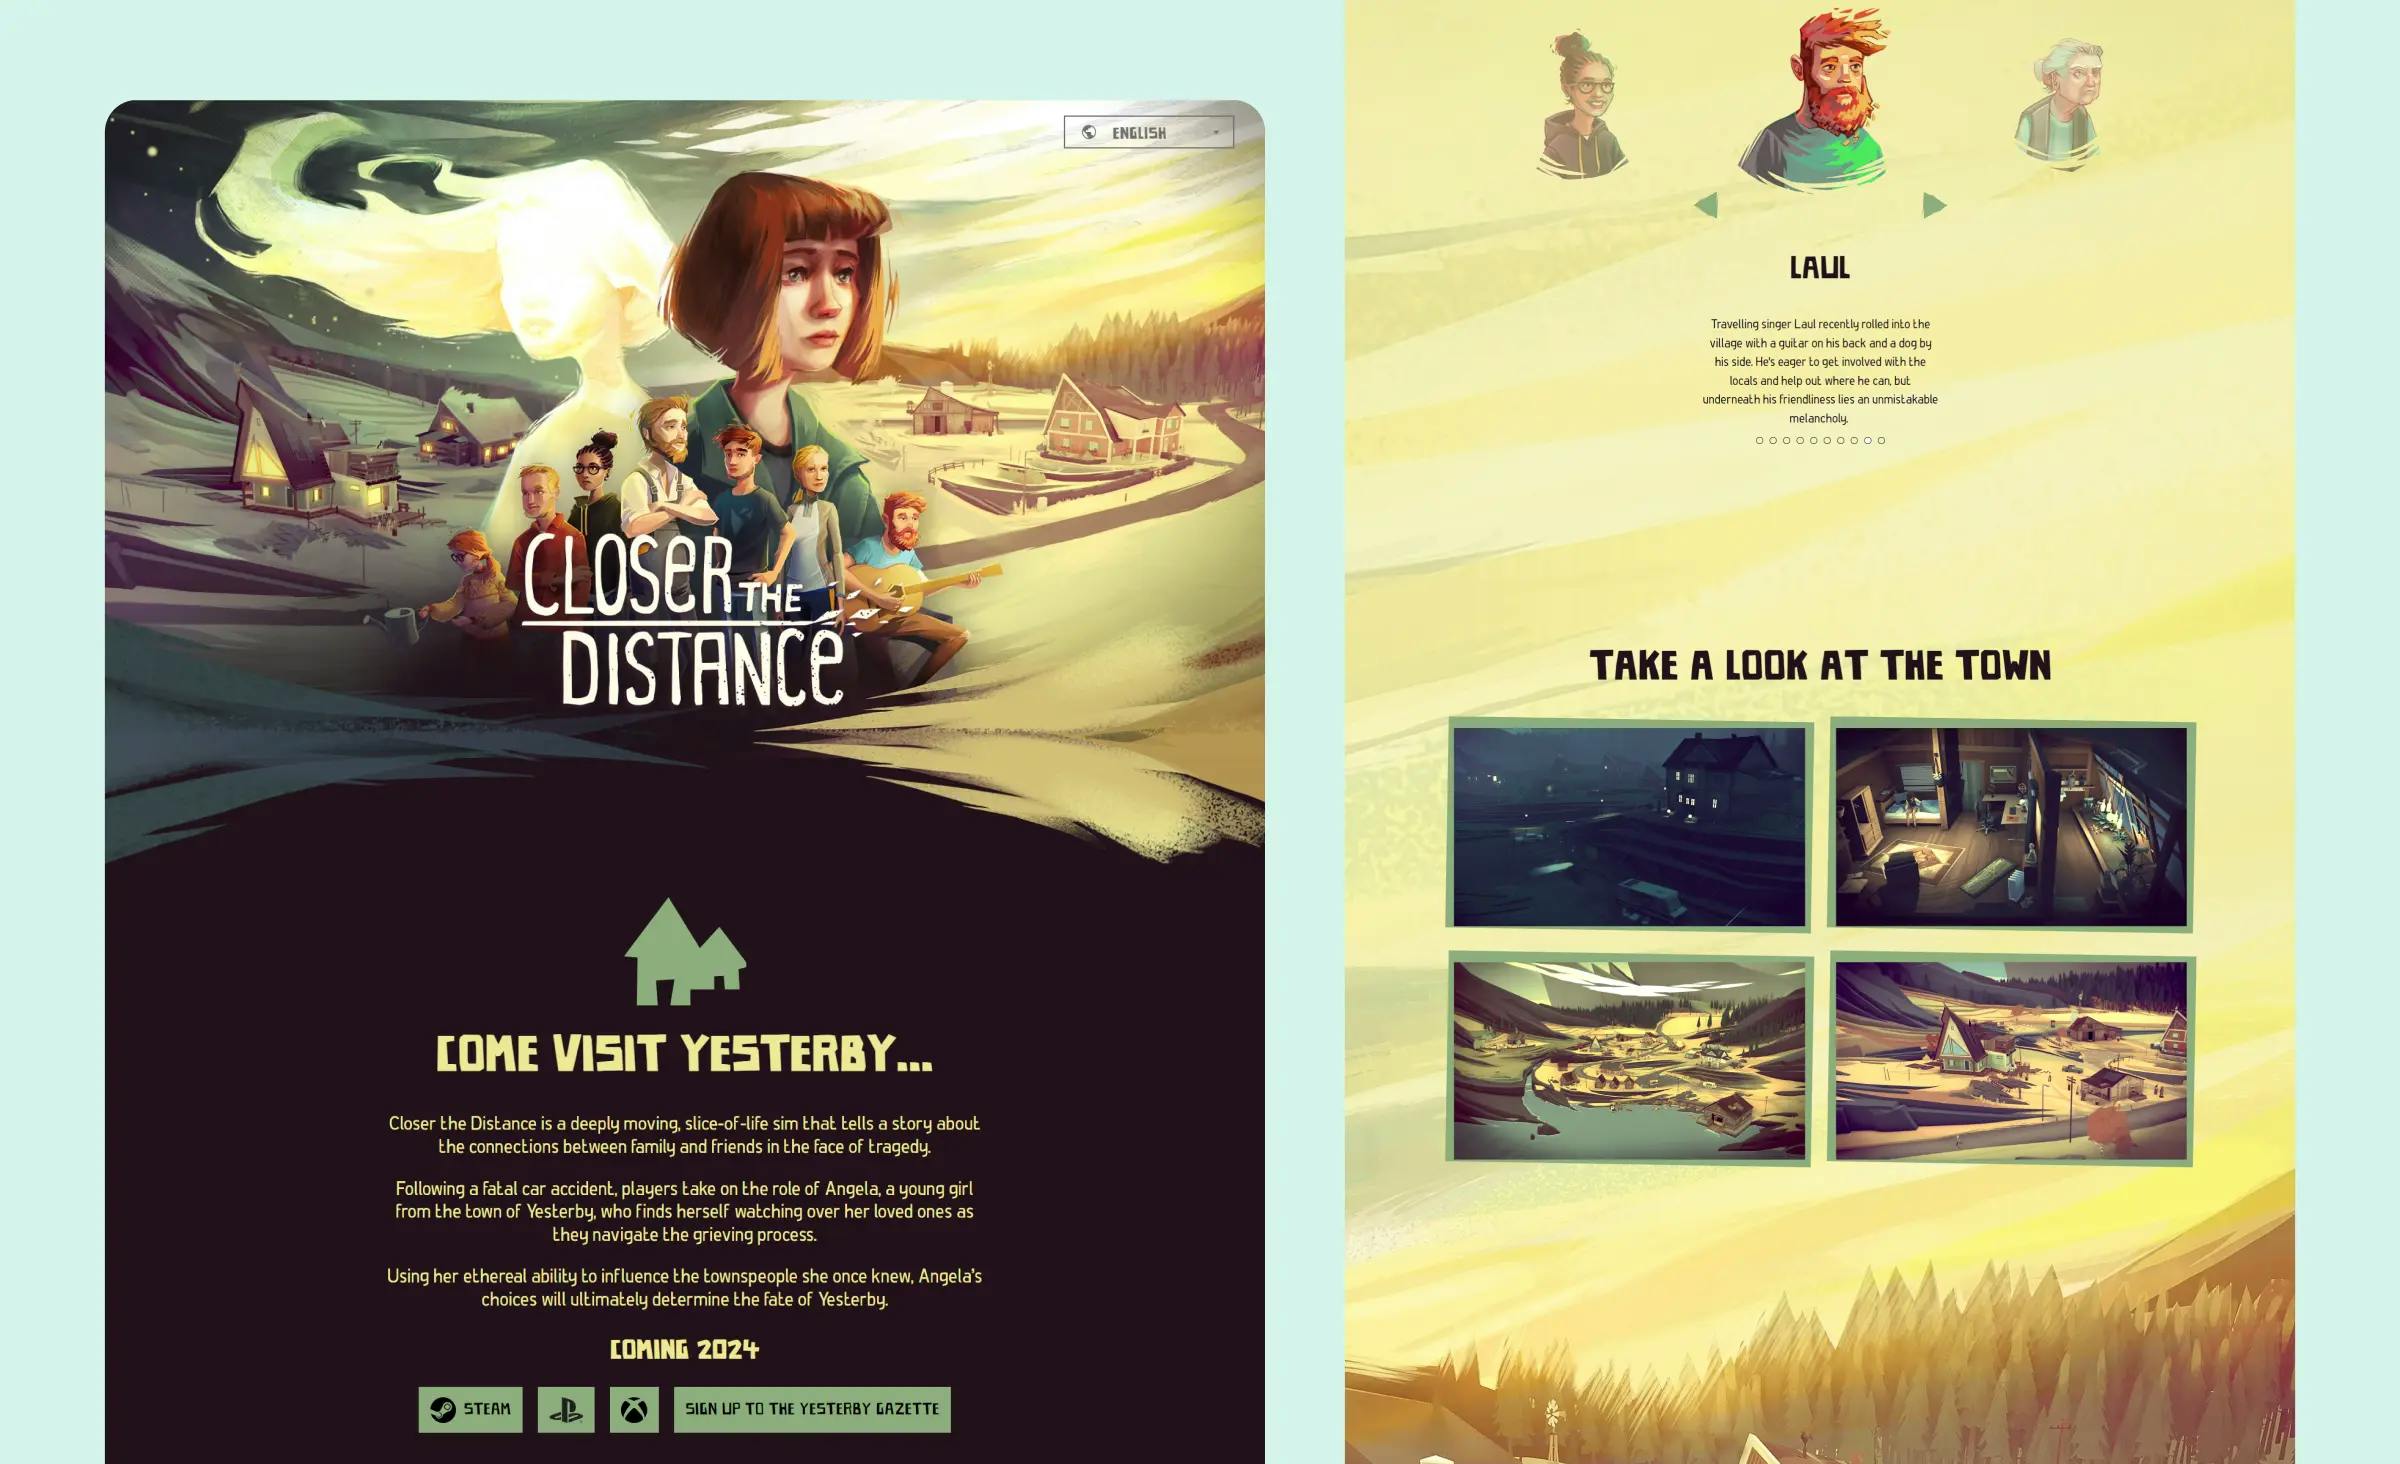 Two screenshots of the Closer the Distance game landing page. The first screenshot shows a colorful and animated landing page. The heading reads "Closer the Distance" and features a picture of a village with a main character and several side characters. Below the heading is a short description of the game and a button for signing up for the newsletter. The second screenshot introduces the user to the game’s characters and provides screenshots of the game’s locations.